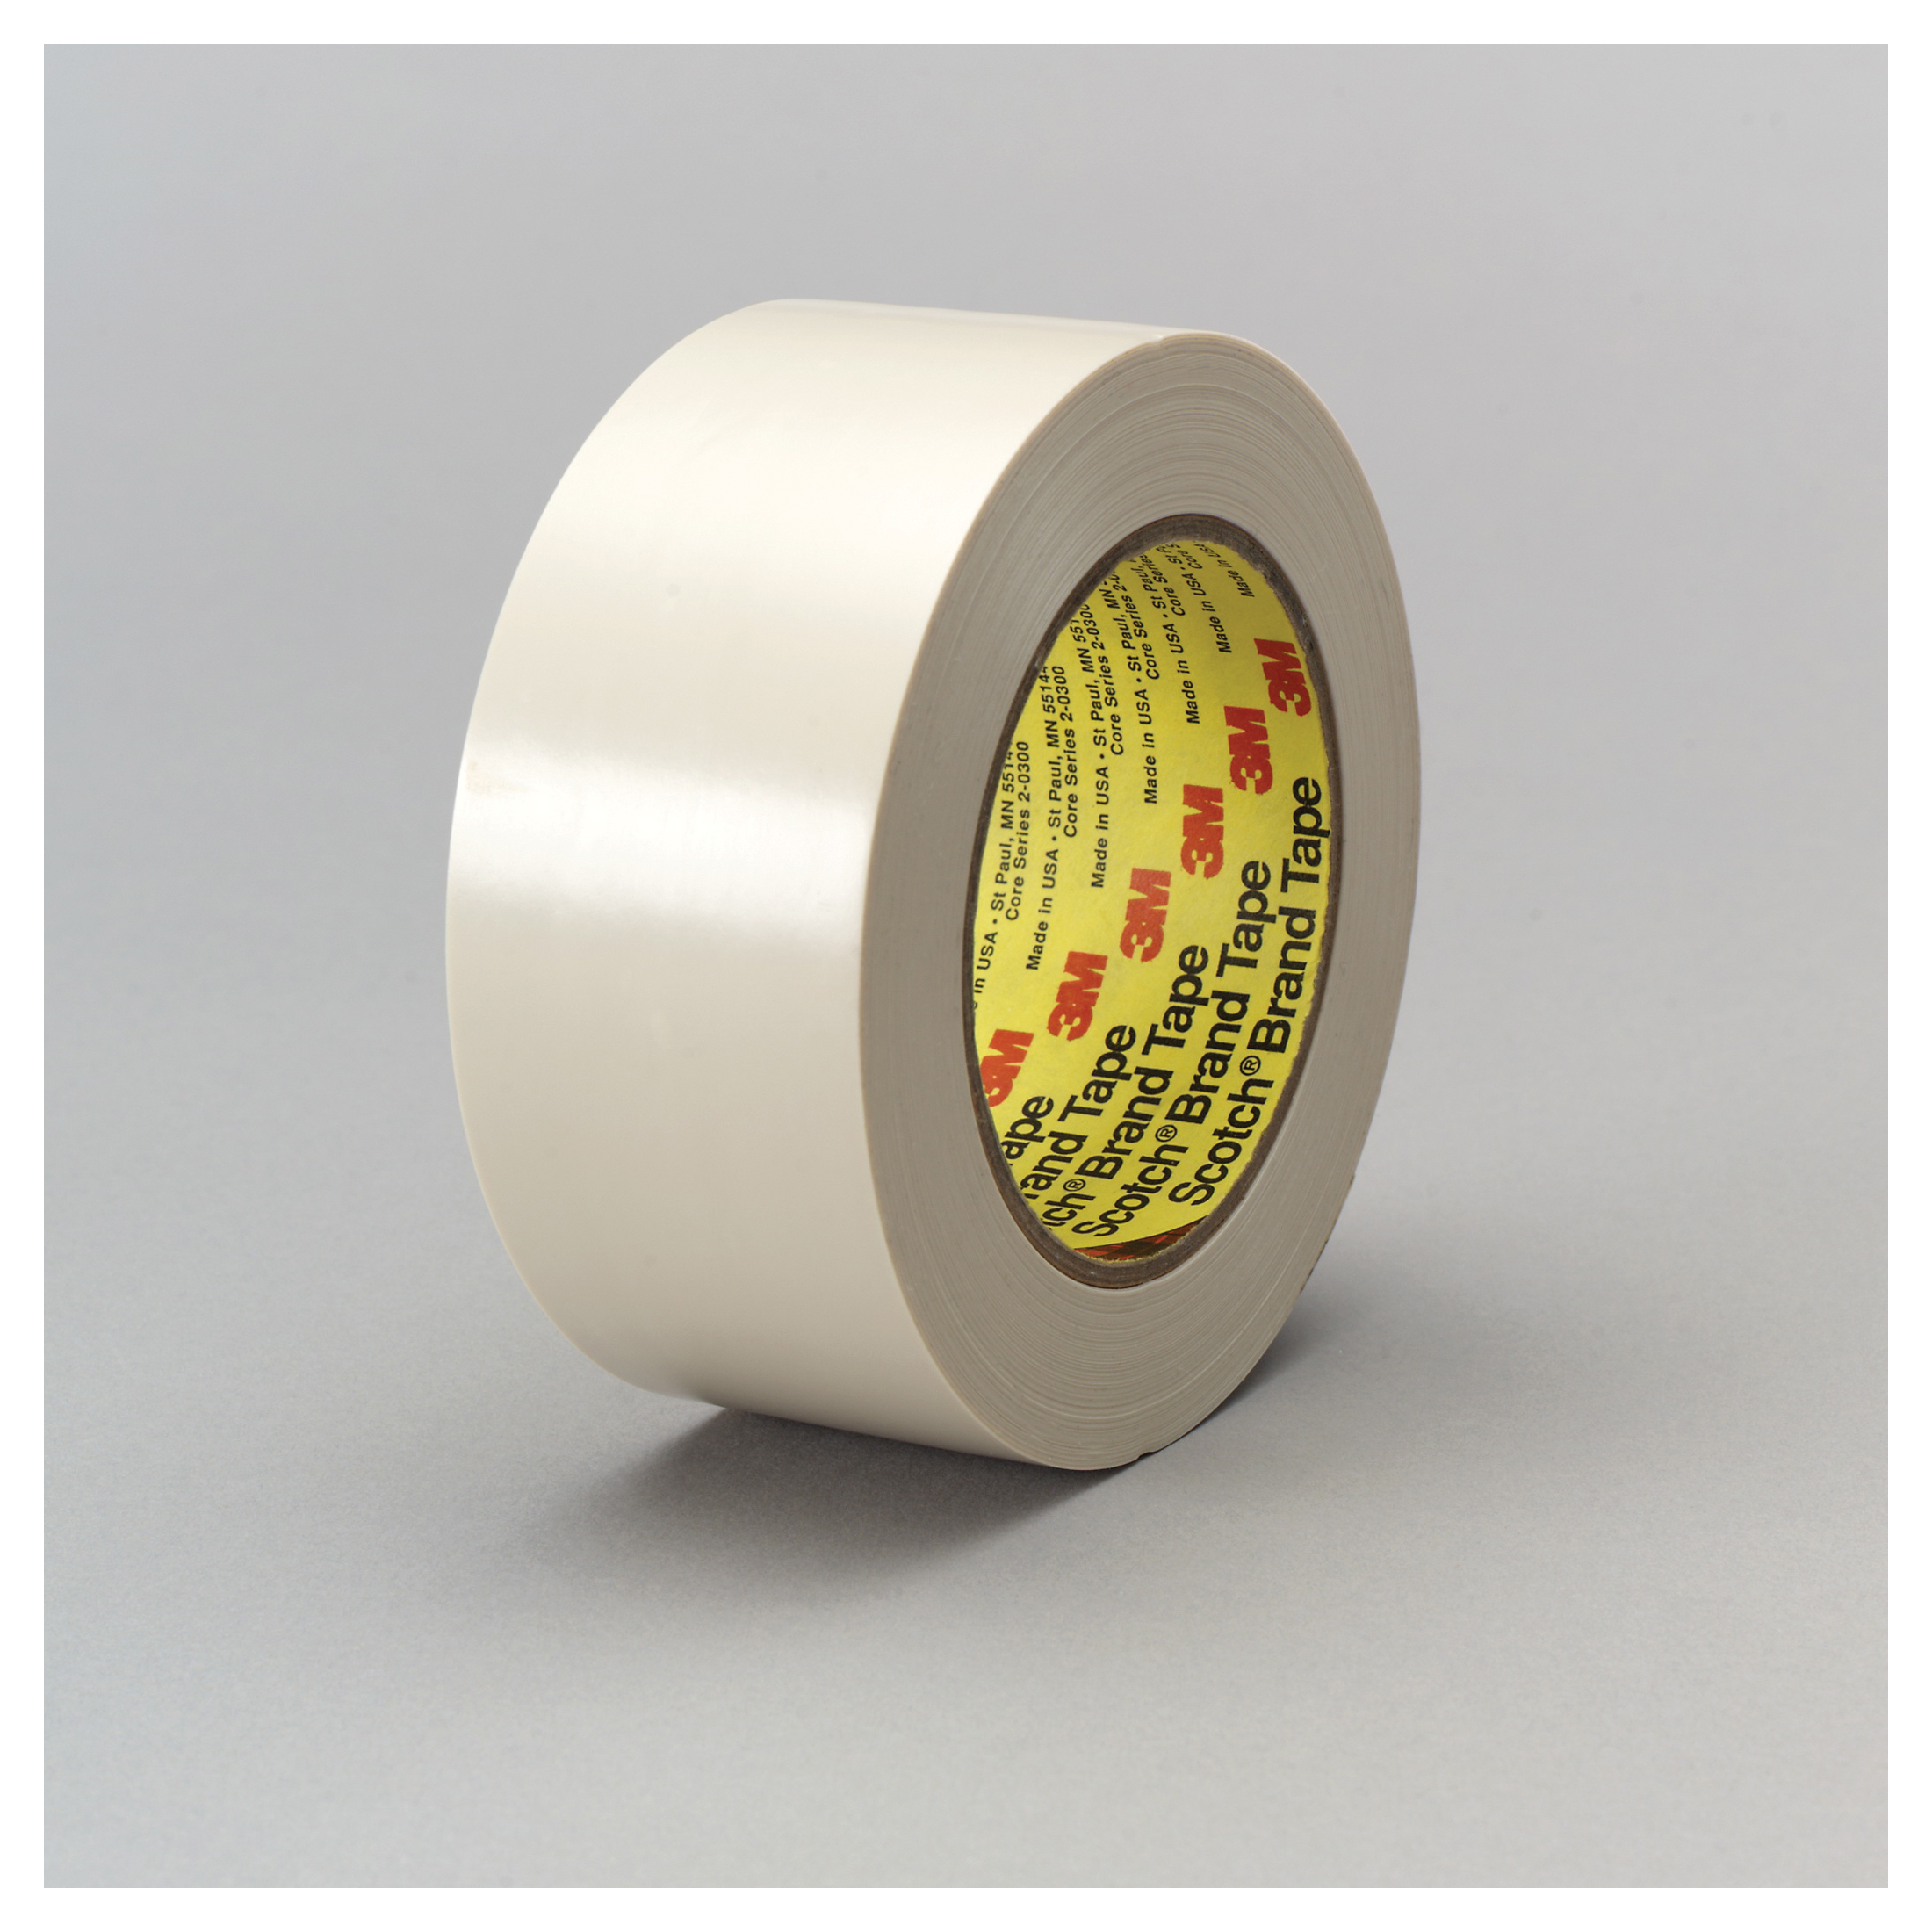 3M™ 021200-87663 Electroplating Tape, 36 yd L x 4 in W, 7.1 mil THK, Rubber Adhesive, Vinyl Backing